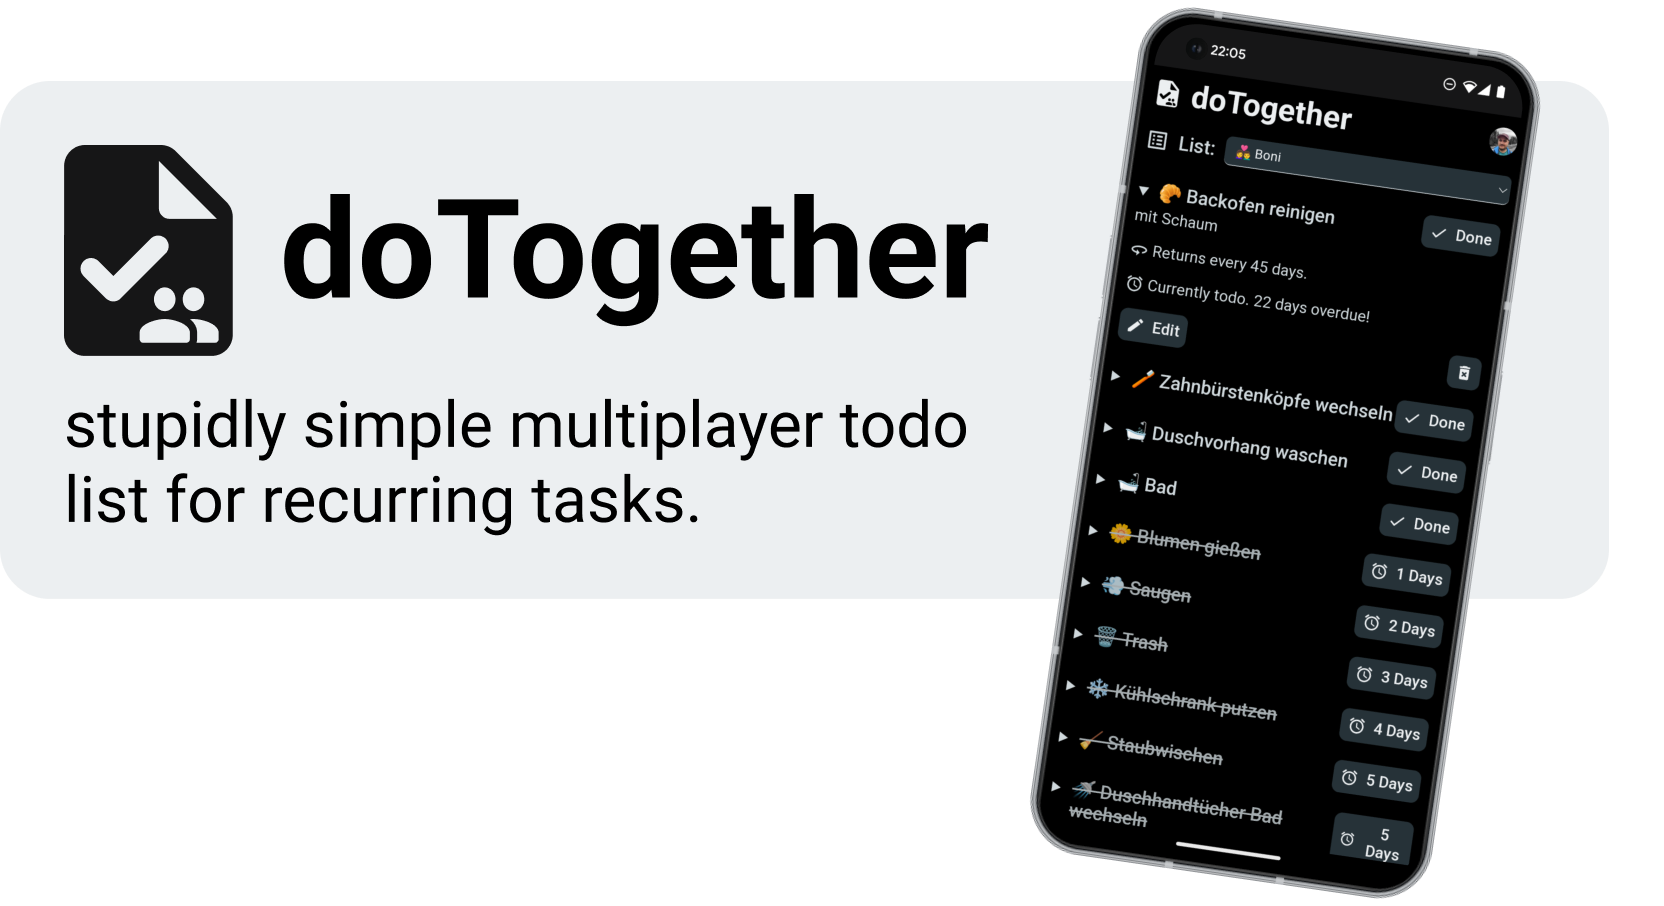 doTogether - stupidly simple multiplayer todo list for recurring tasks. - A mockup of a Phone with the UI of doTogether showing. The app displays a list of tasks, each with a button to mark as done, or a notice for when the item will come back.